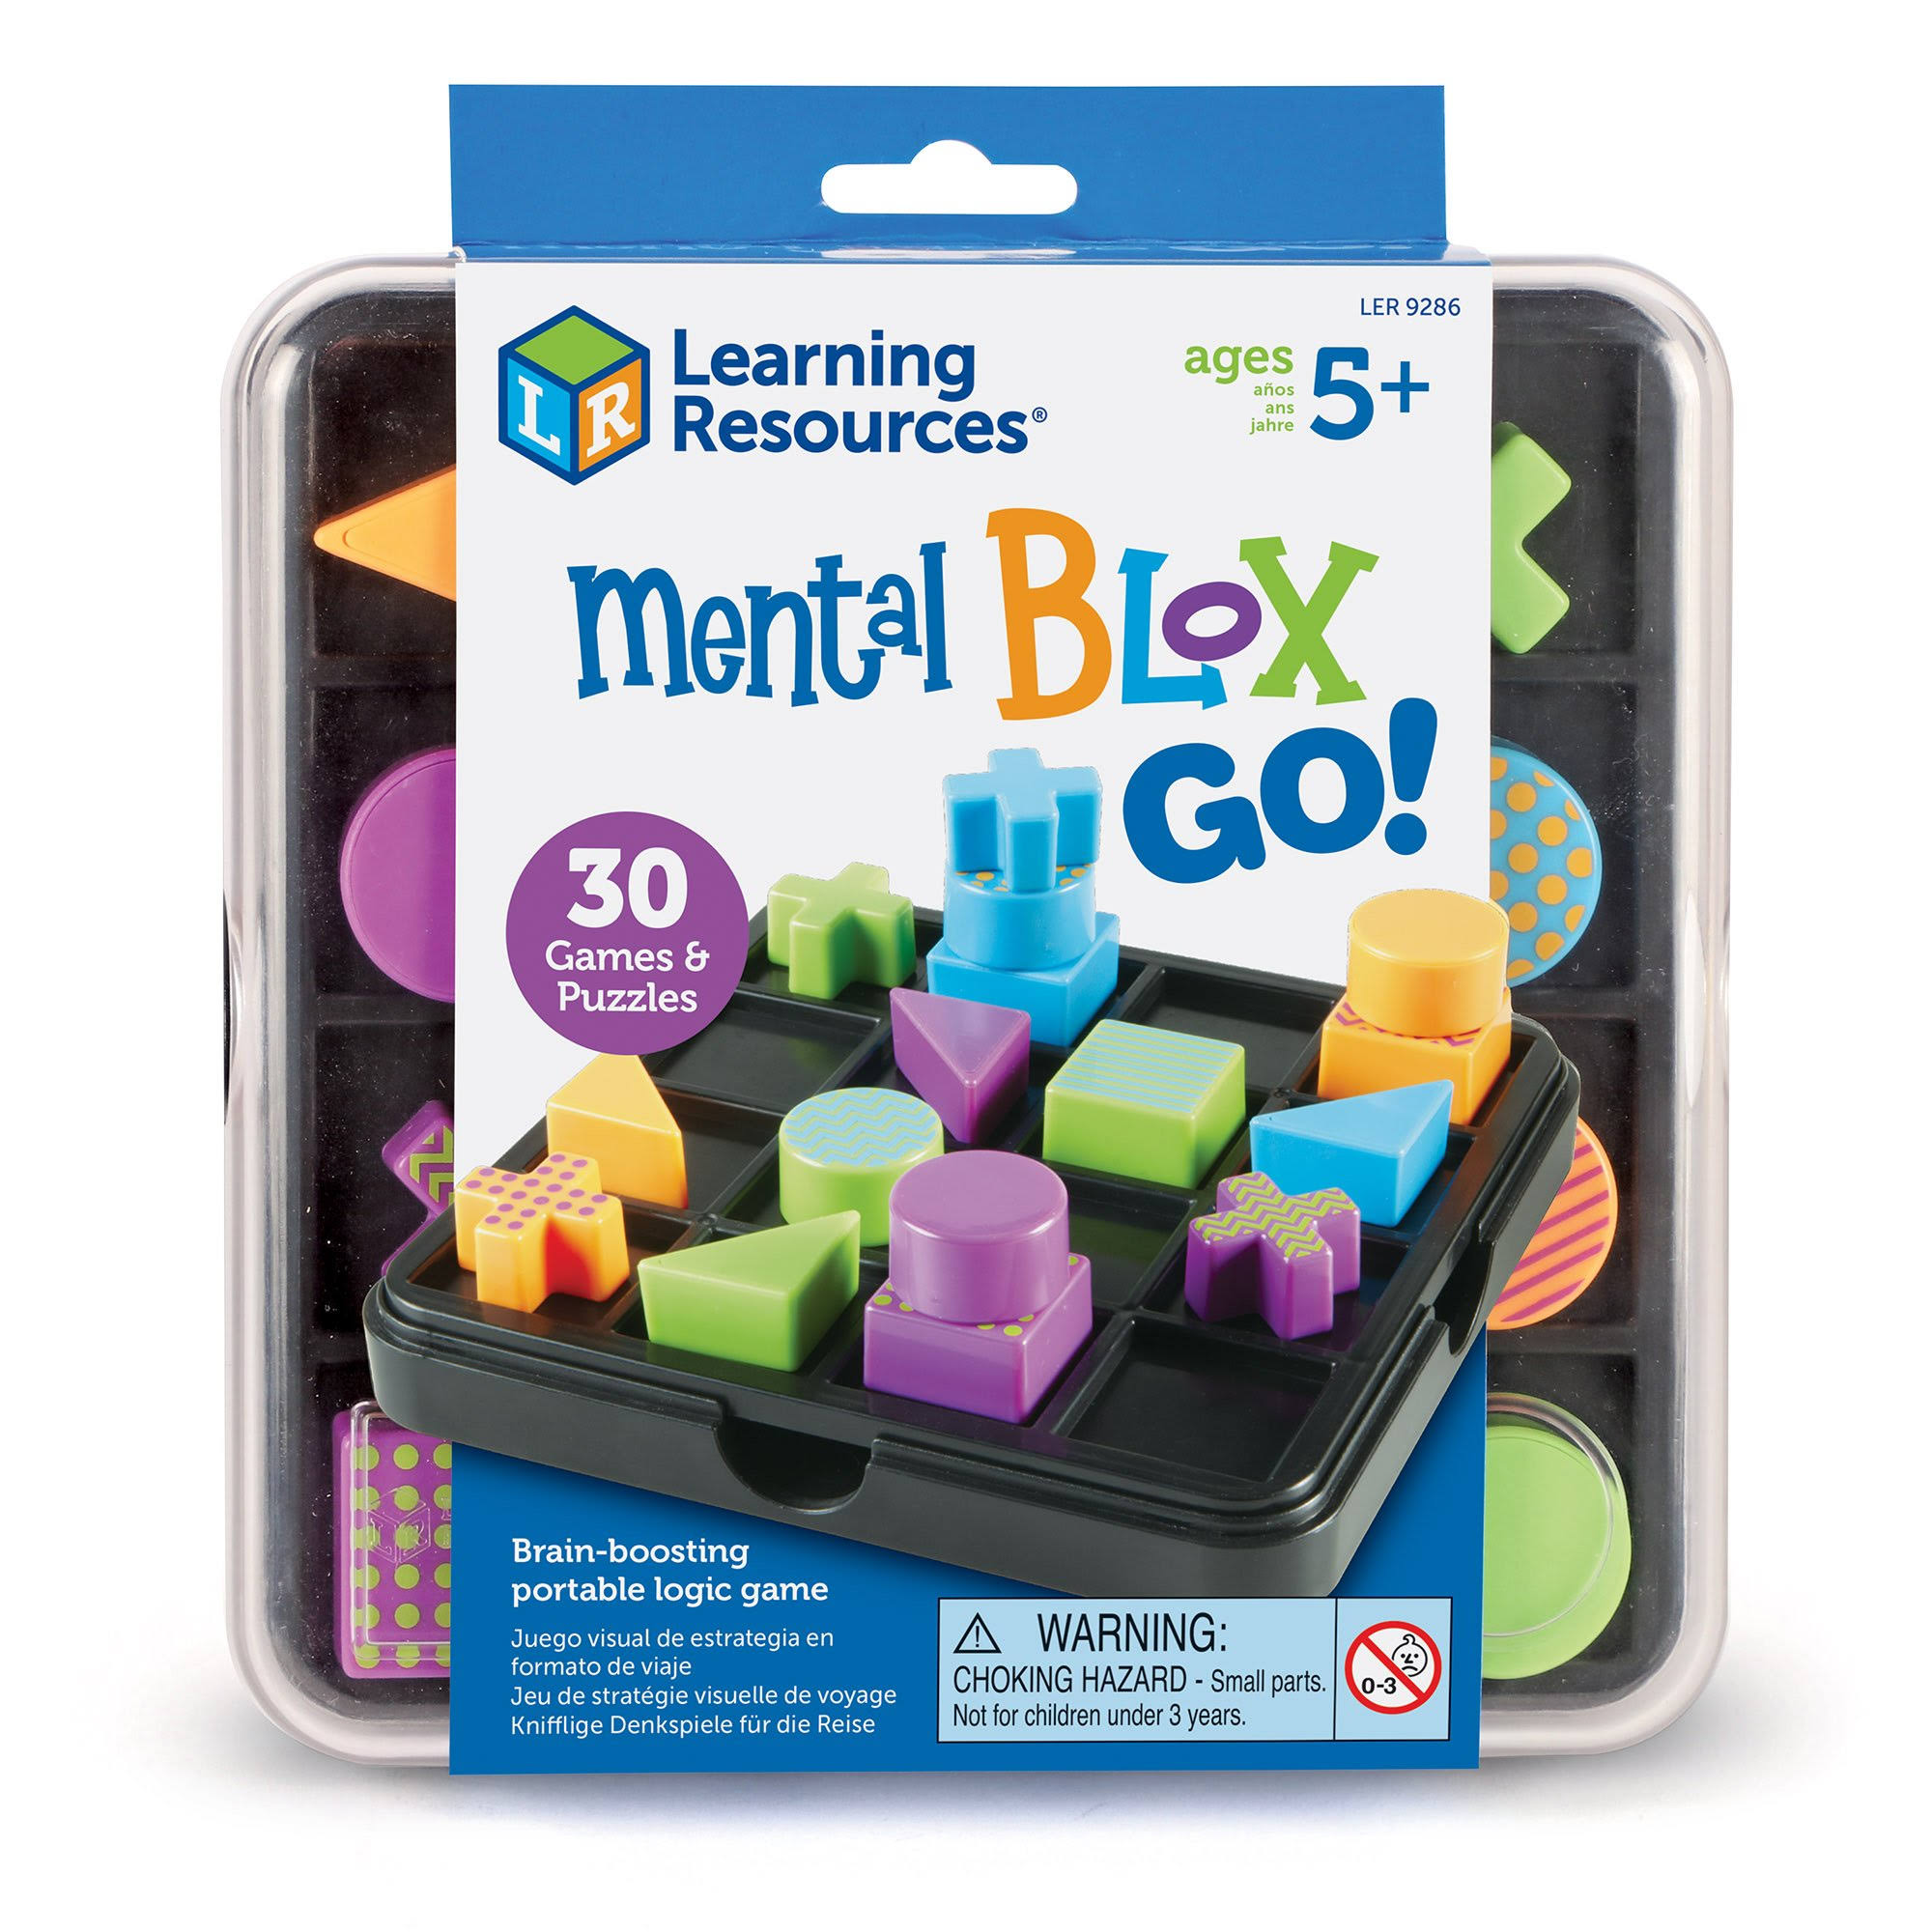 LEARNING RESOURCES - Ler9286 | Mental Blox Go!